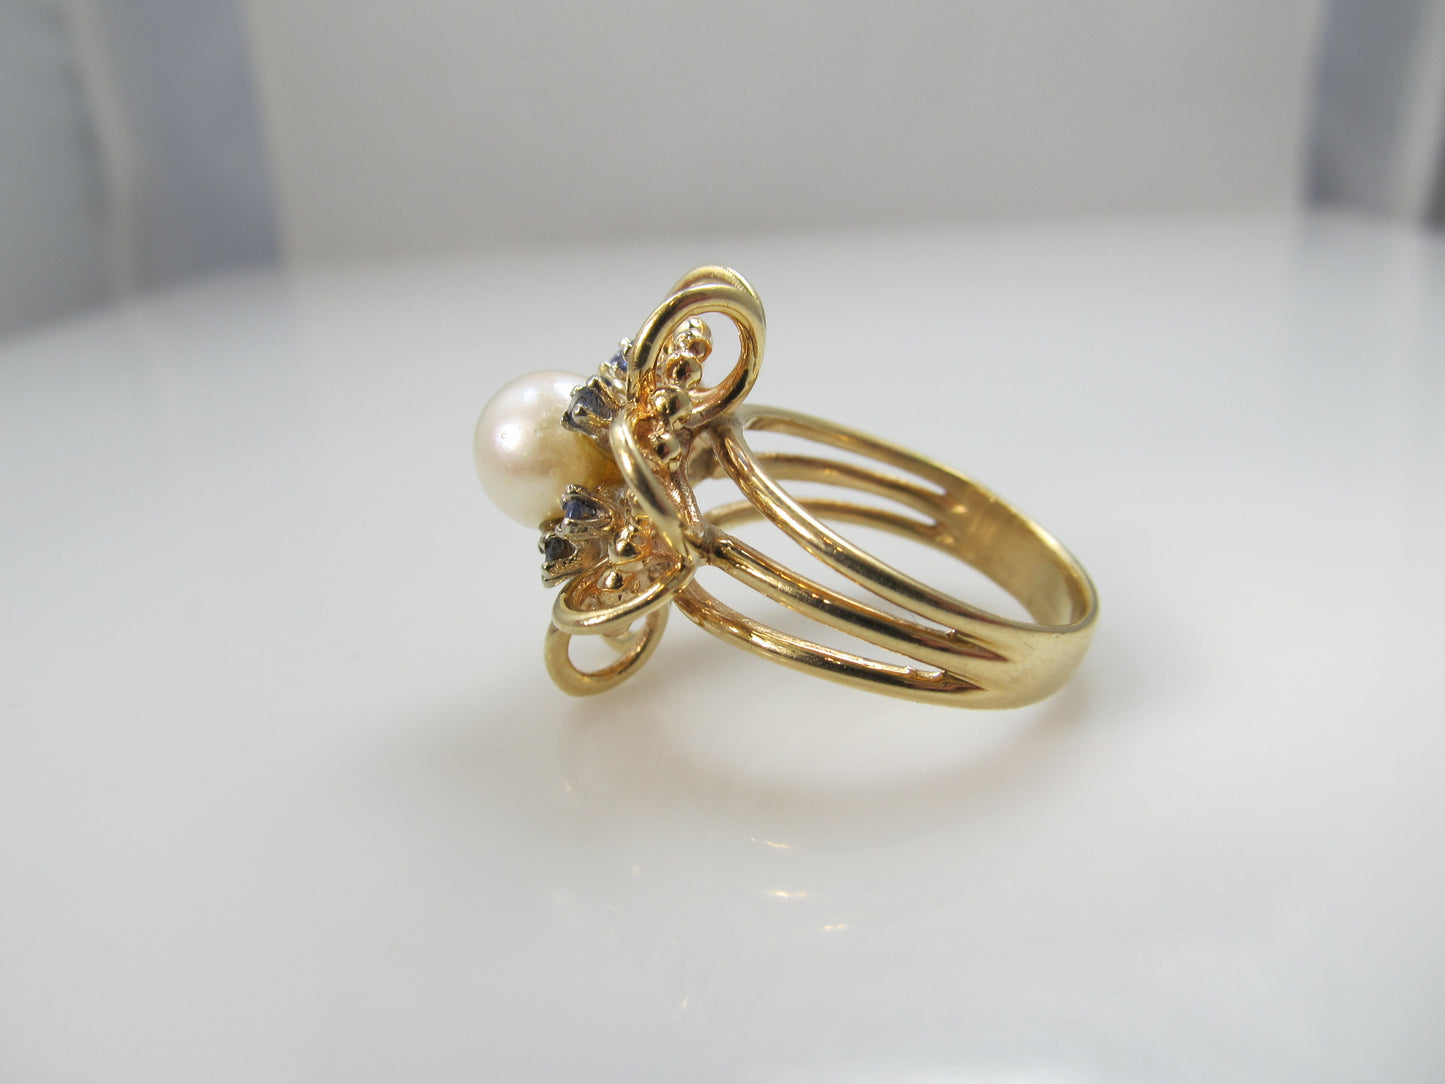 14k yellow gold ring with sapphires and a pearl